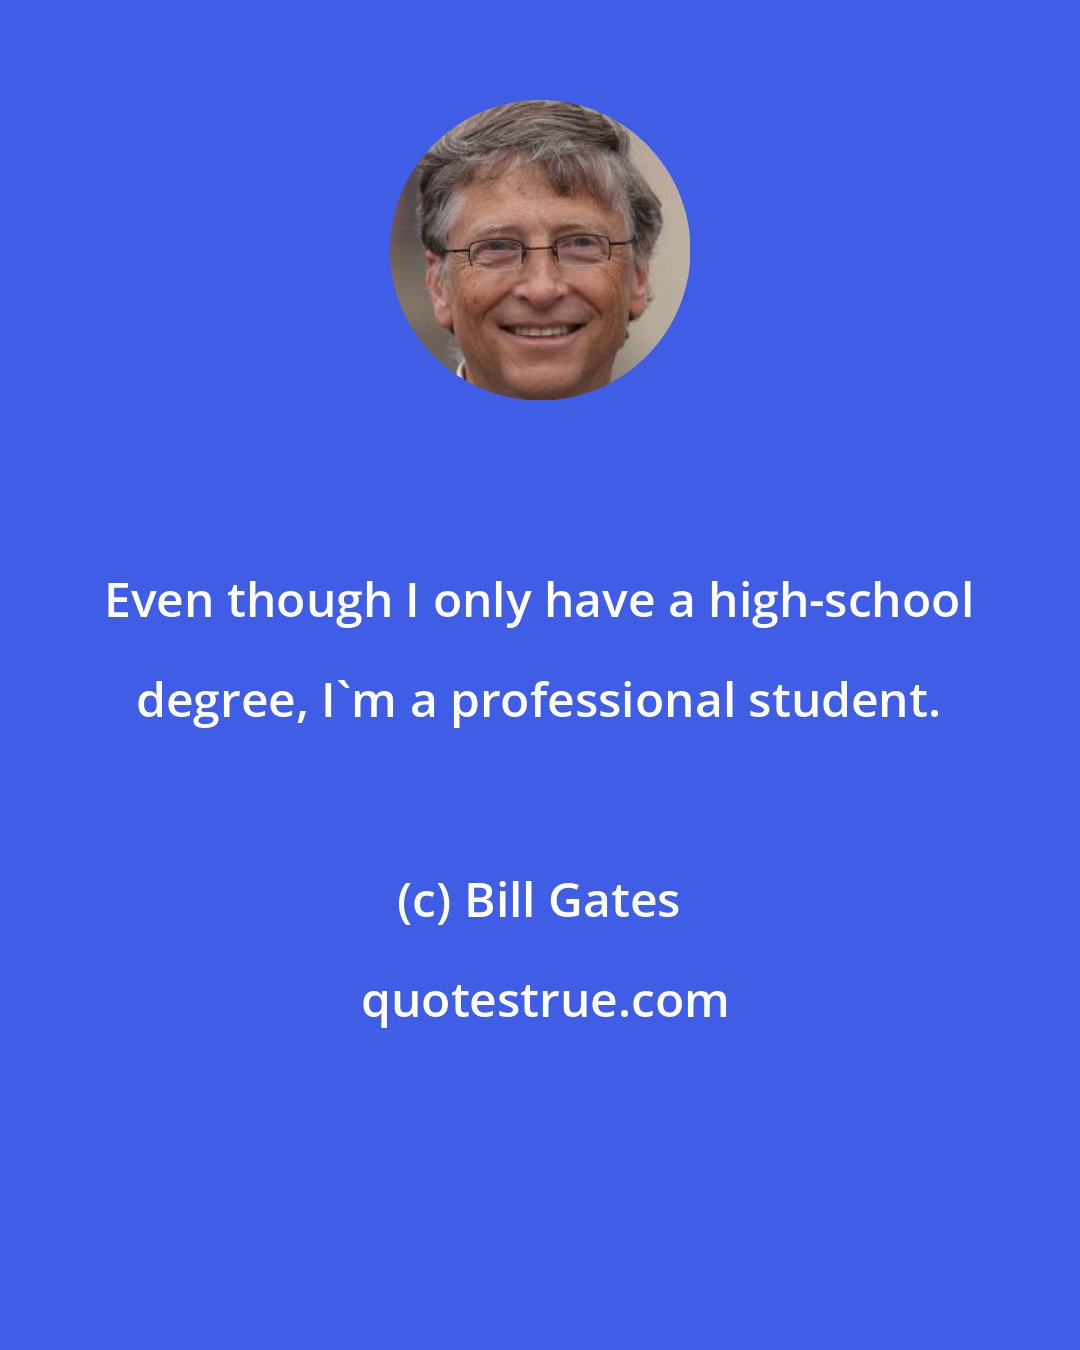 Bill Gates: Even though I only have a high-school degree, I'm a professional student.